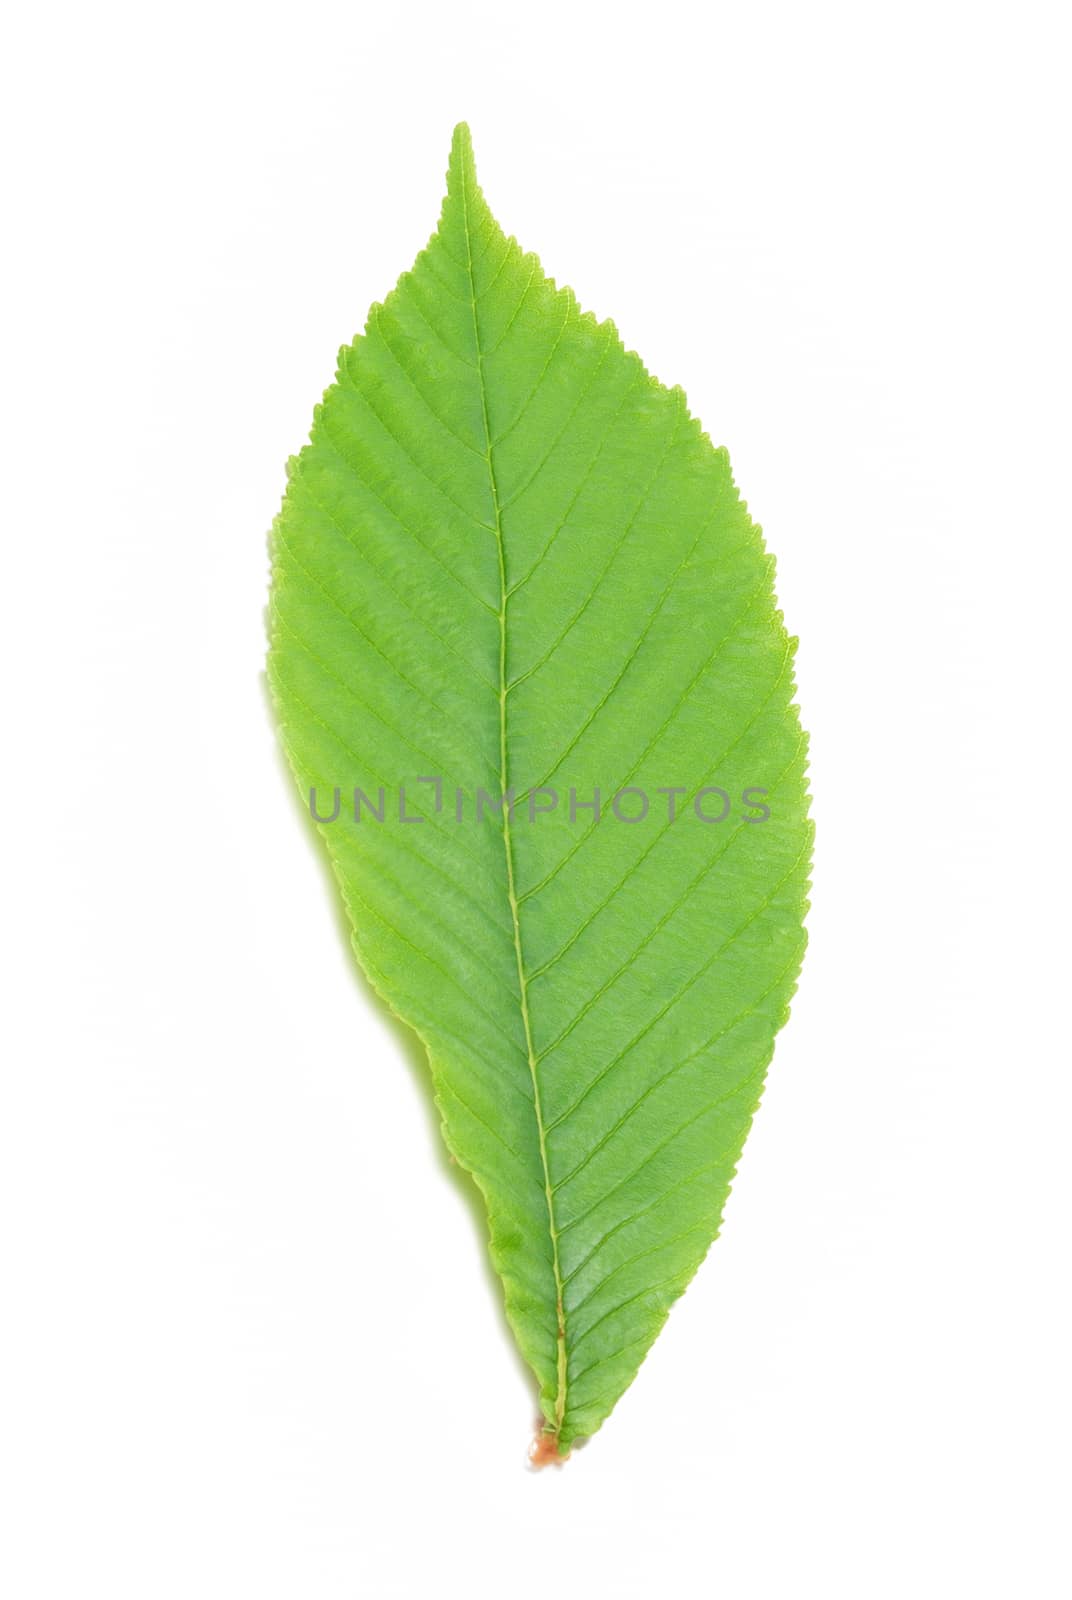 Green chestnut leaf isolated on white background.